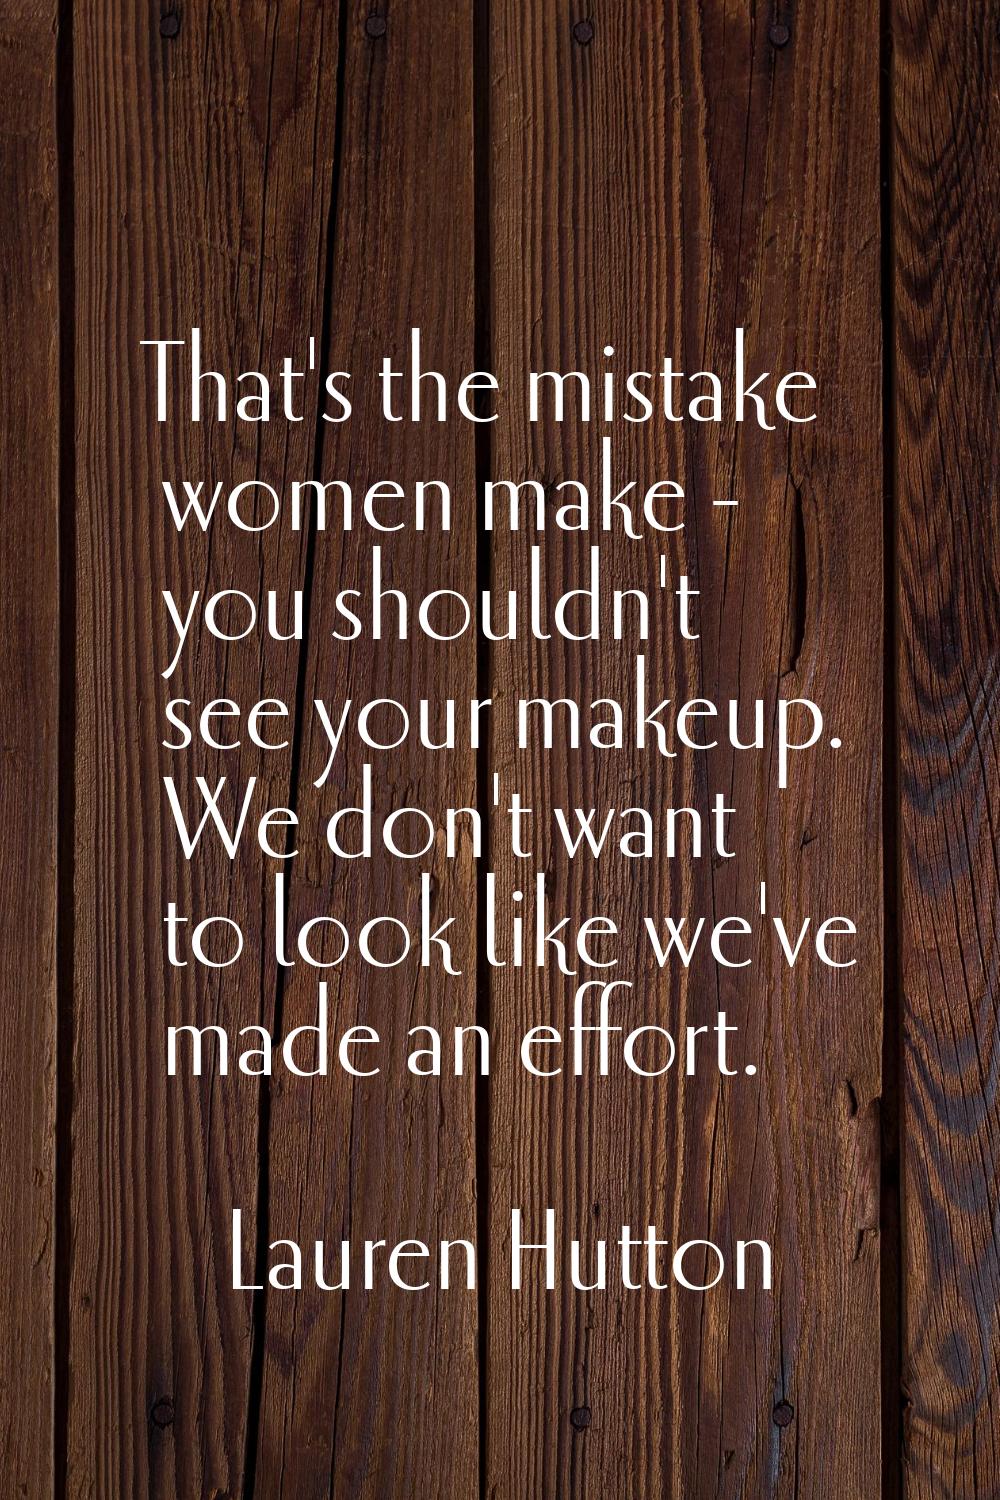 That's the mistake women make - you shouldn't see your makeup. We don't want to look like we've mad